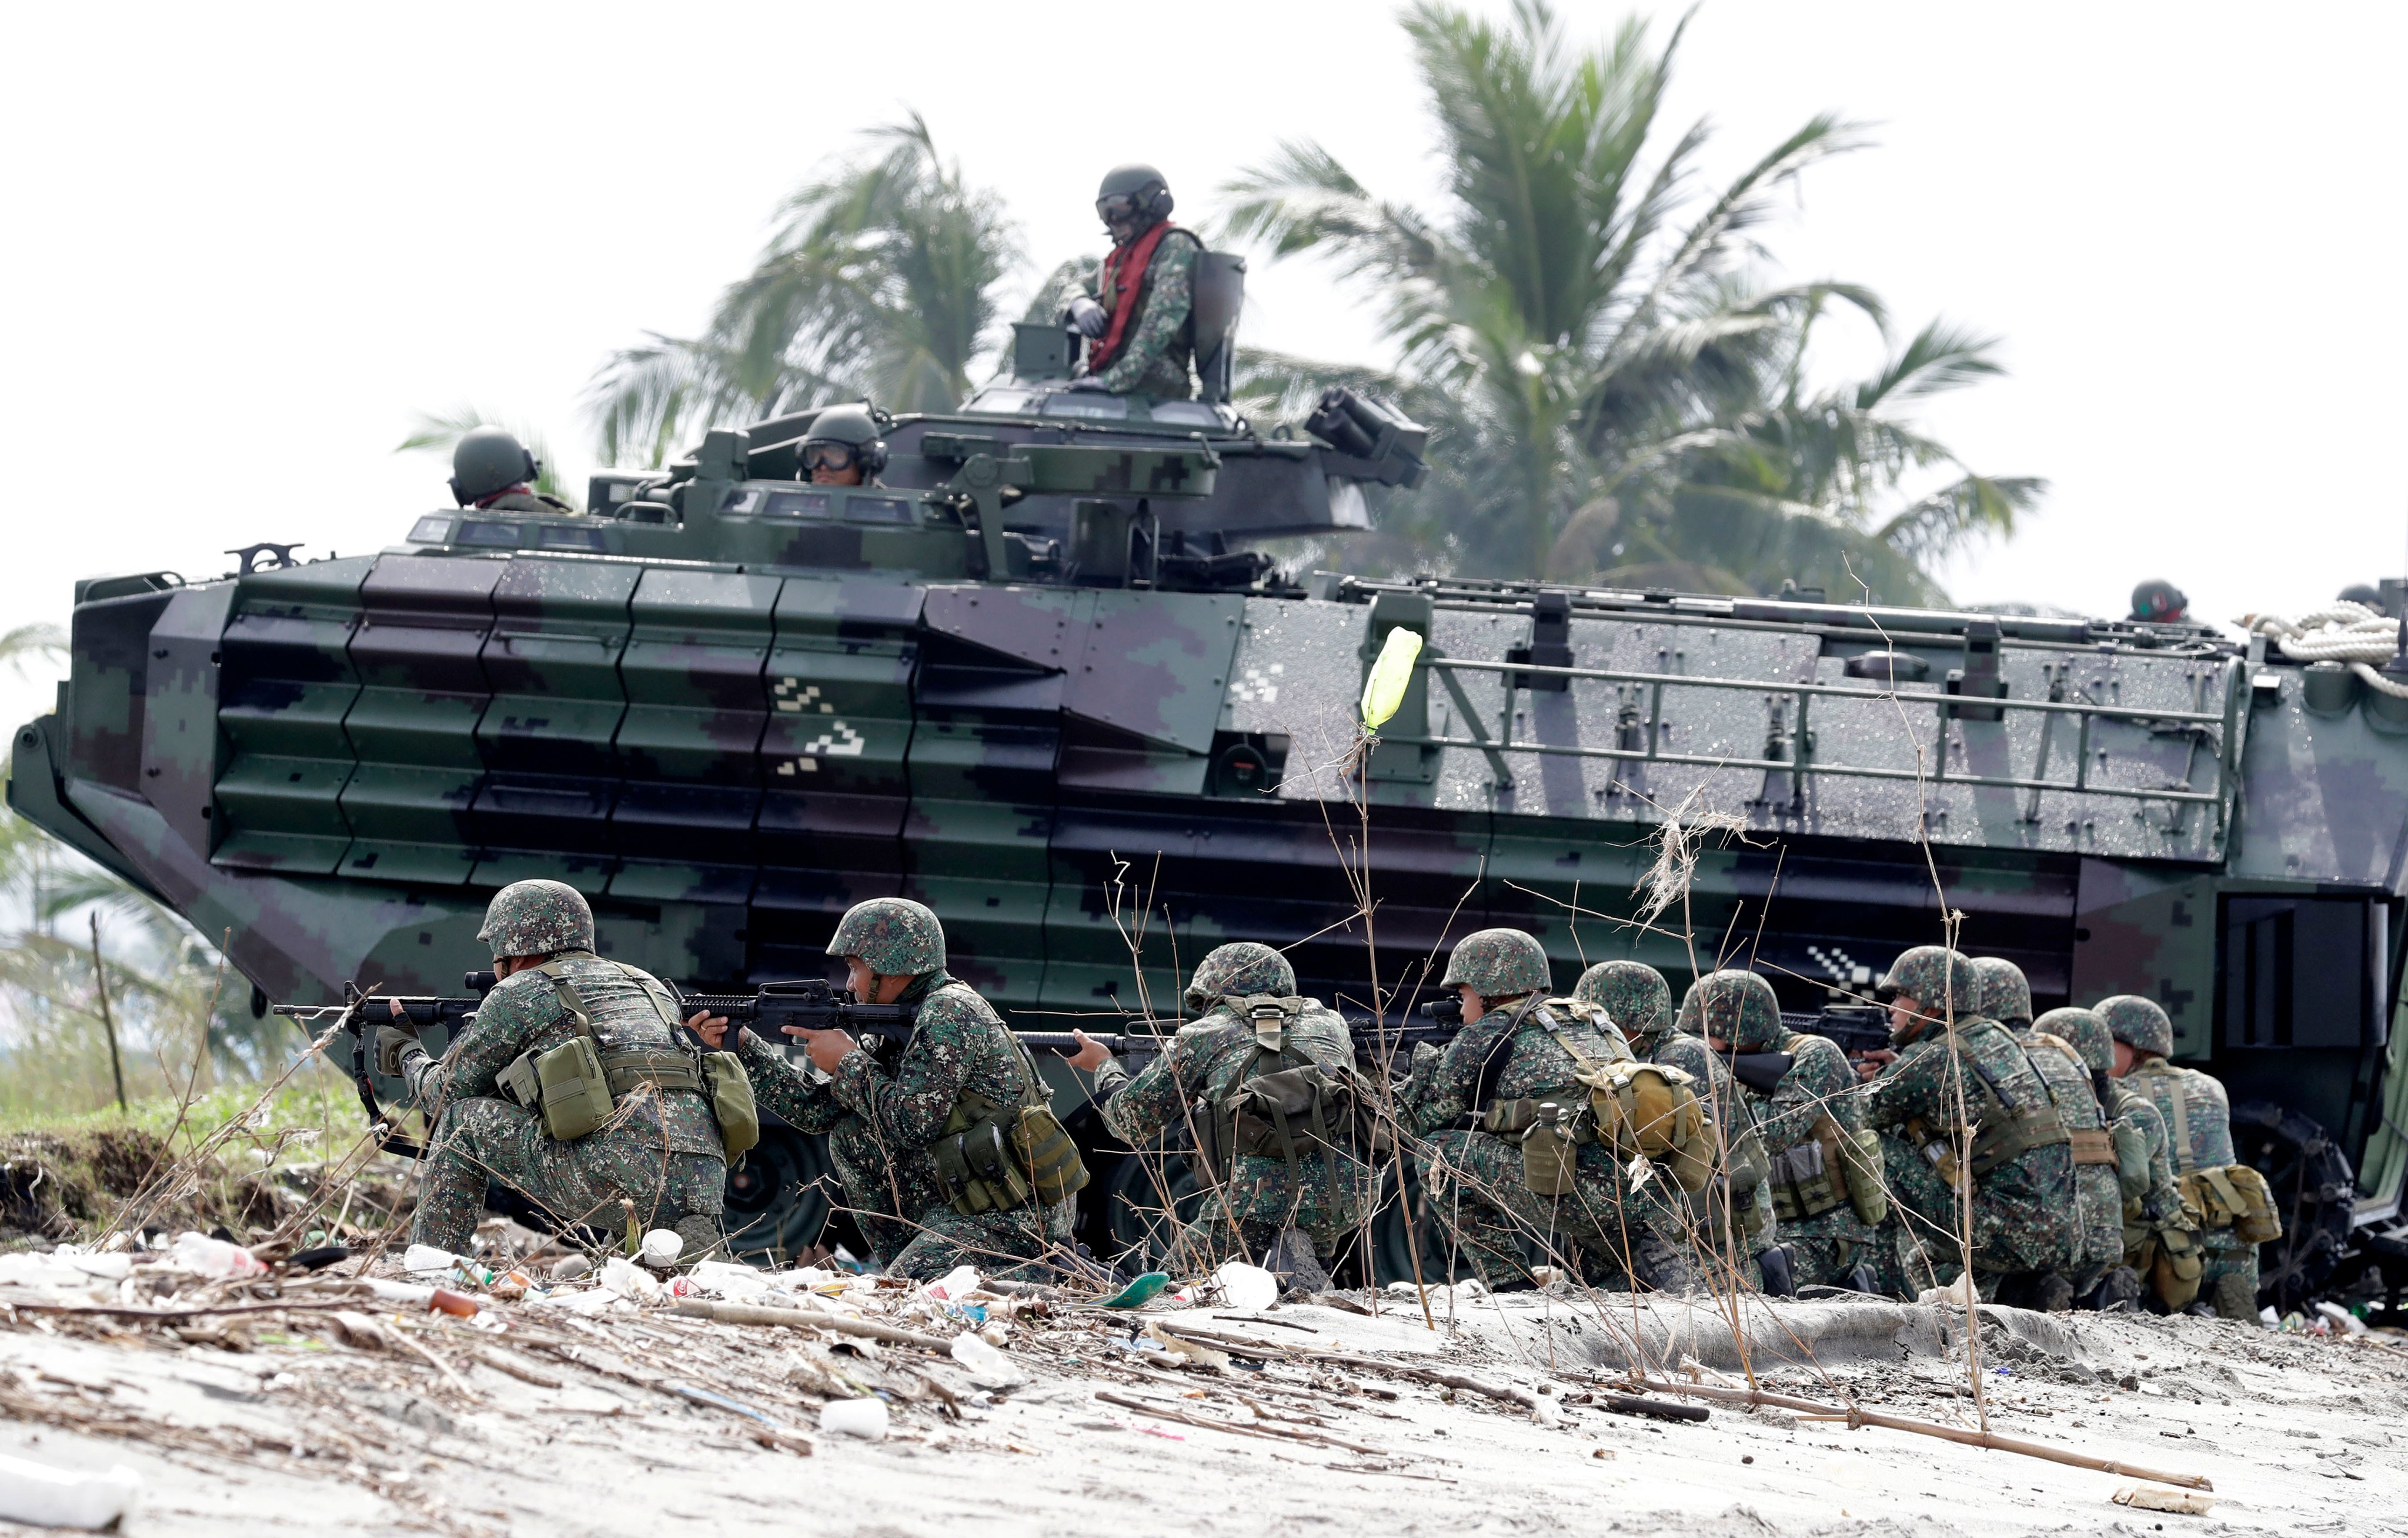 Philippine marines take their positions during a drill at the former US naval facility in Subic. File photo: AP